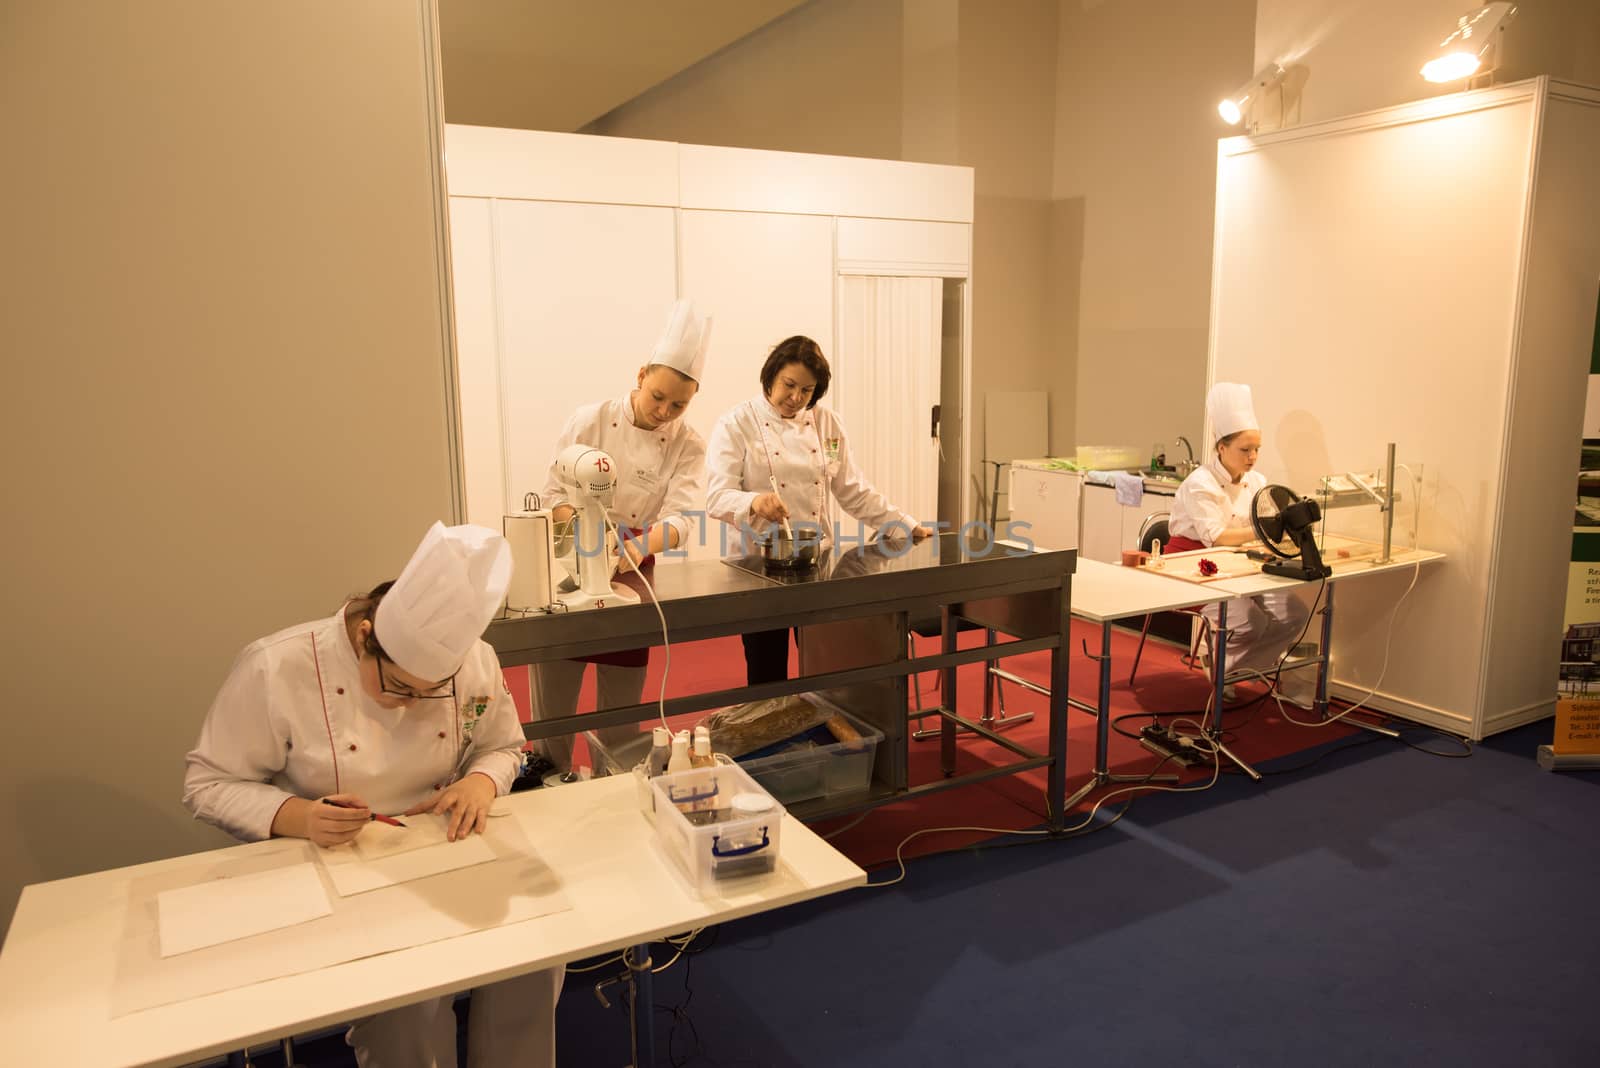 Four women are preparing food while attending an event at the convention trade center in Brno. BVV Brno Exhibition center. Czech Republic by gonzalobell